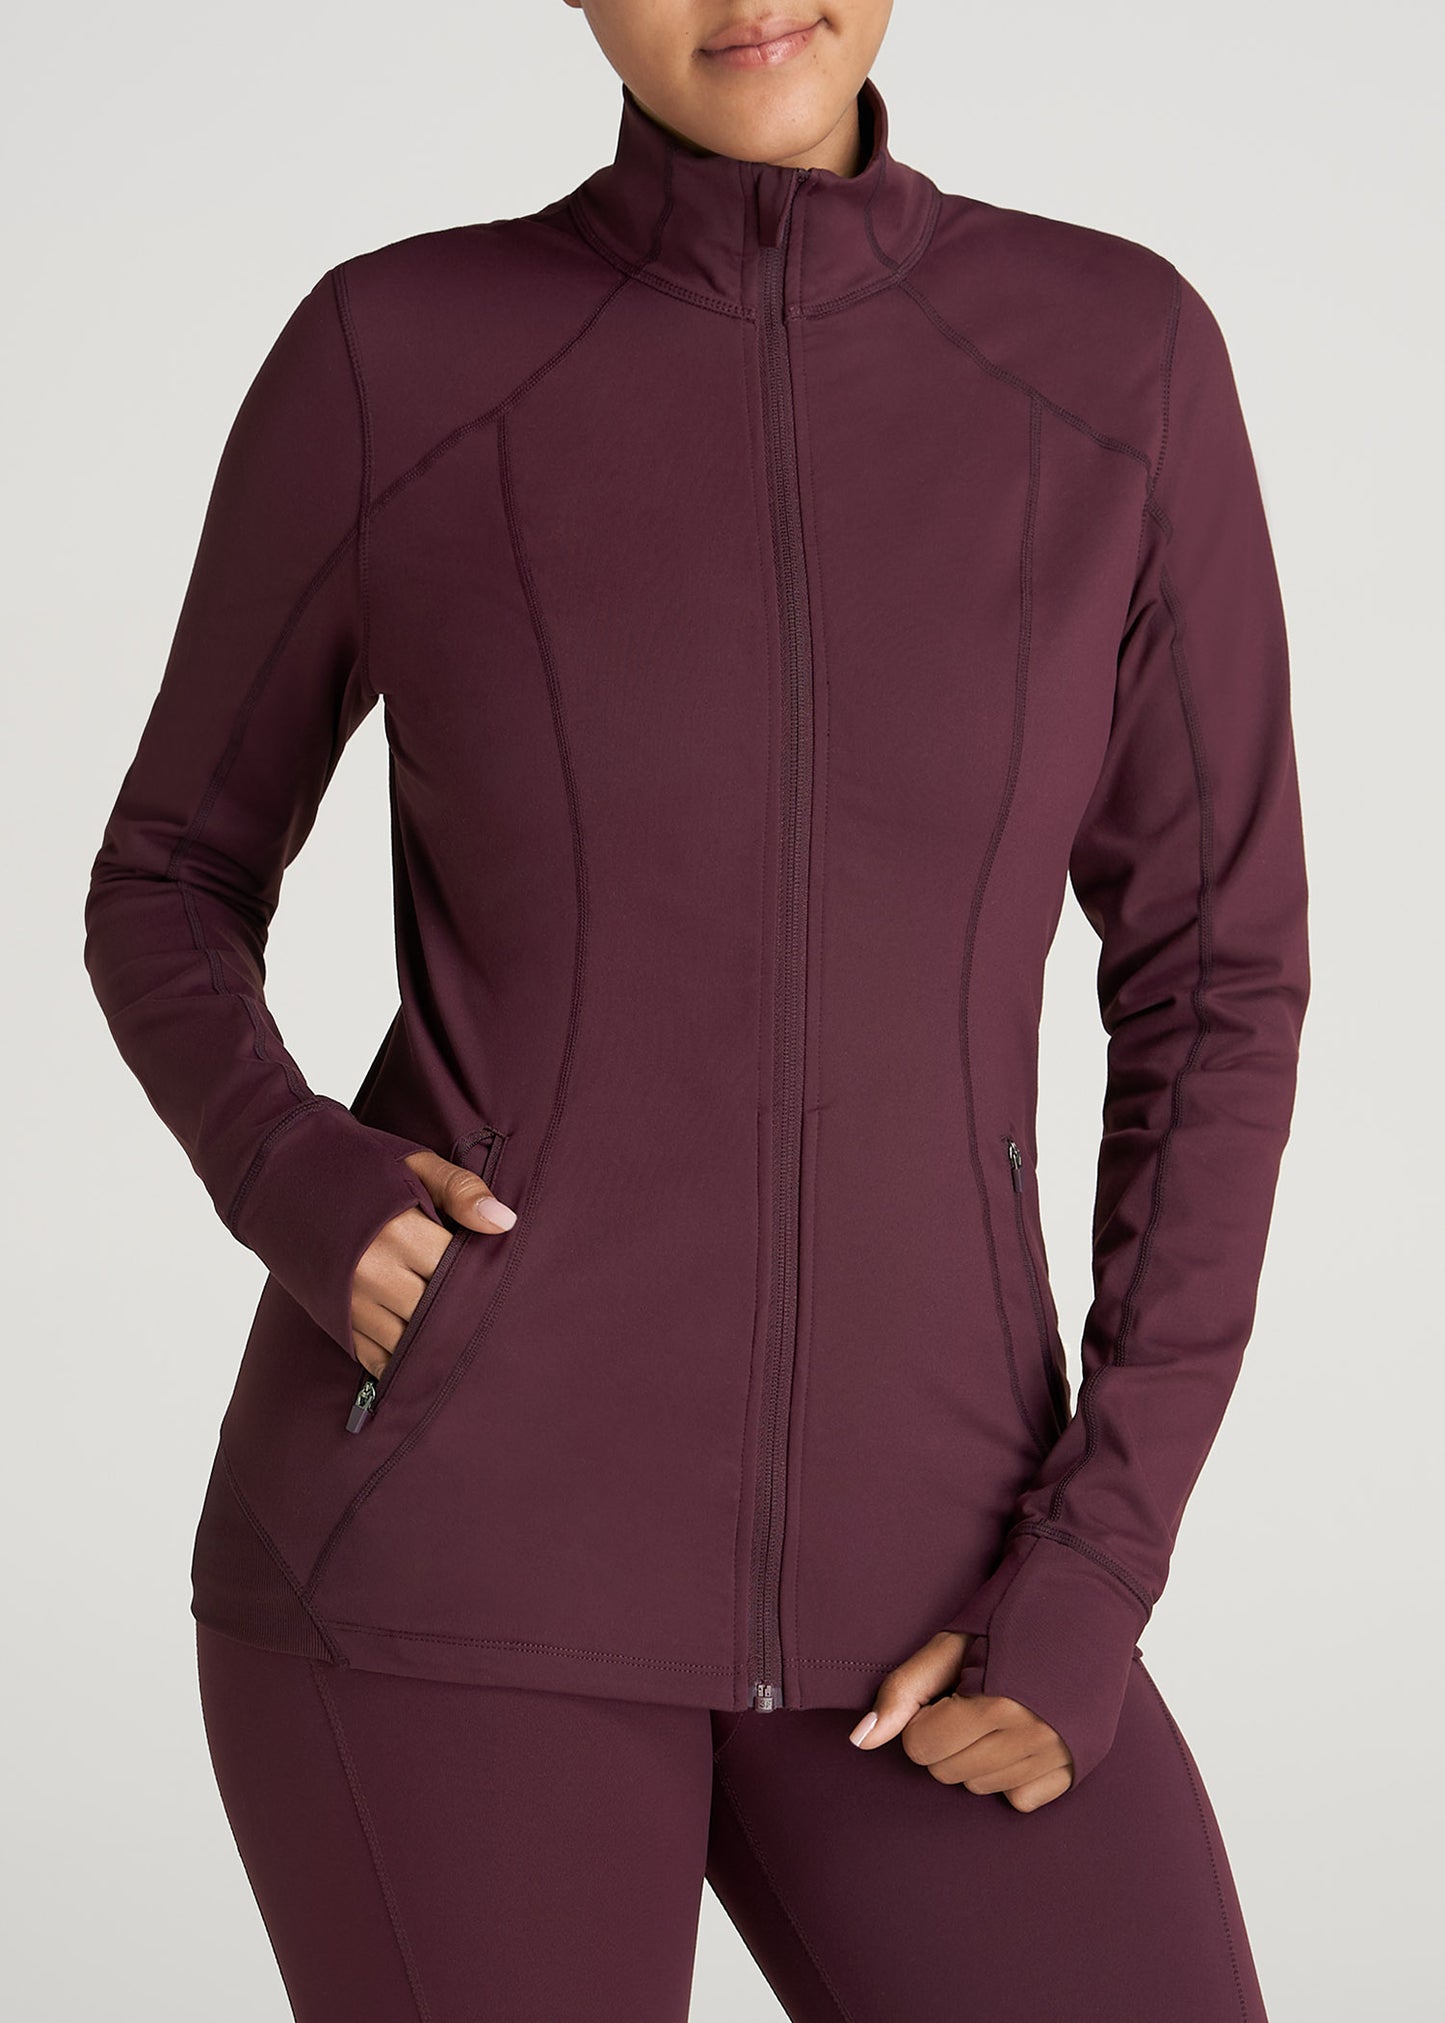 American-Tall-Women-WarmUp-AthleticJacket-Beetroot-front